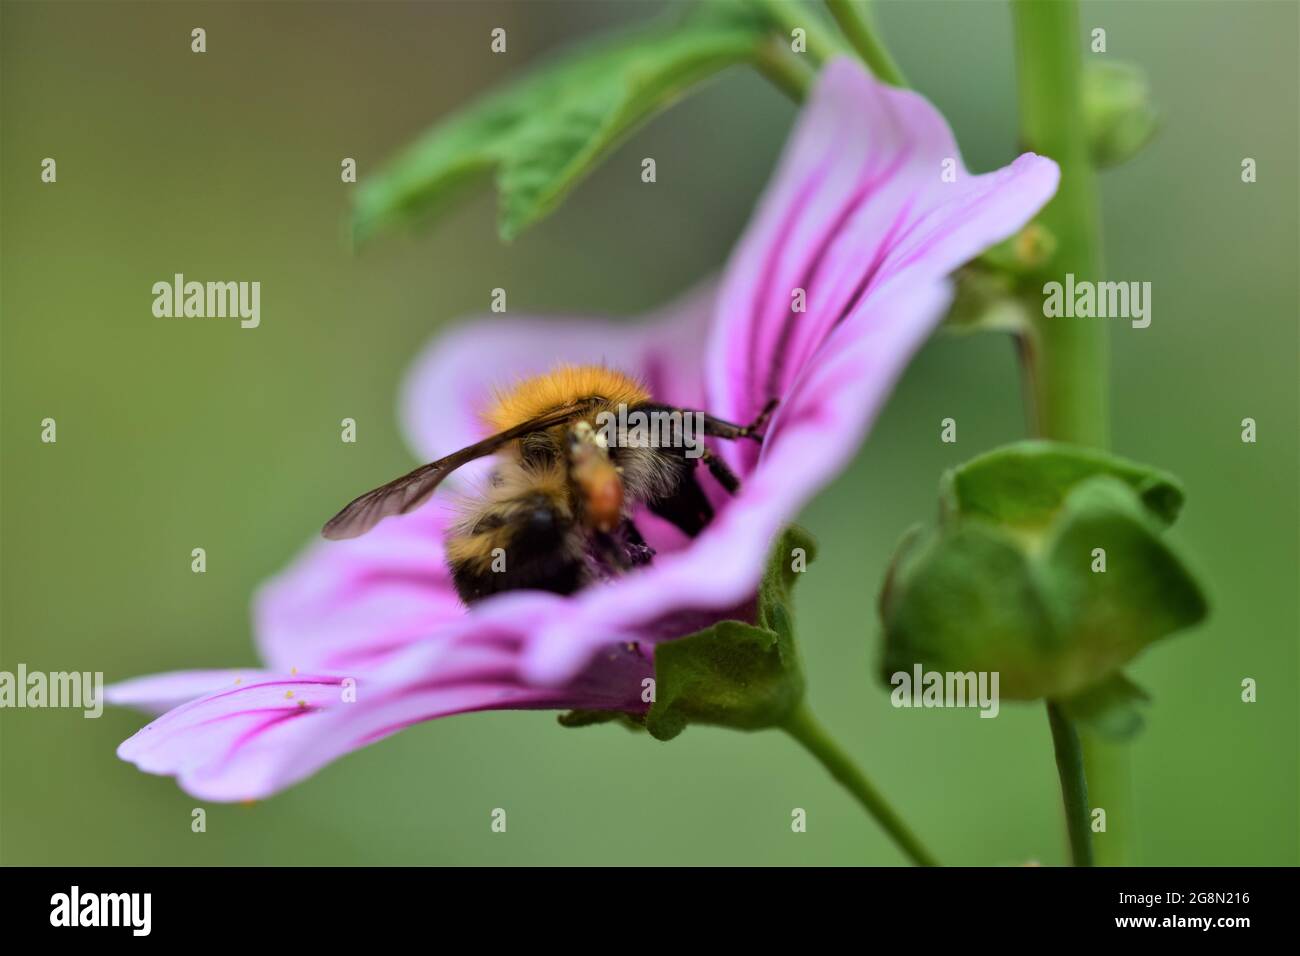 Bumble bee collects pollen in a zebra mallow Stock Photo